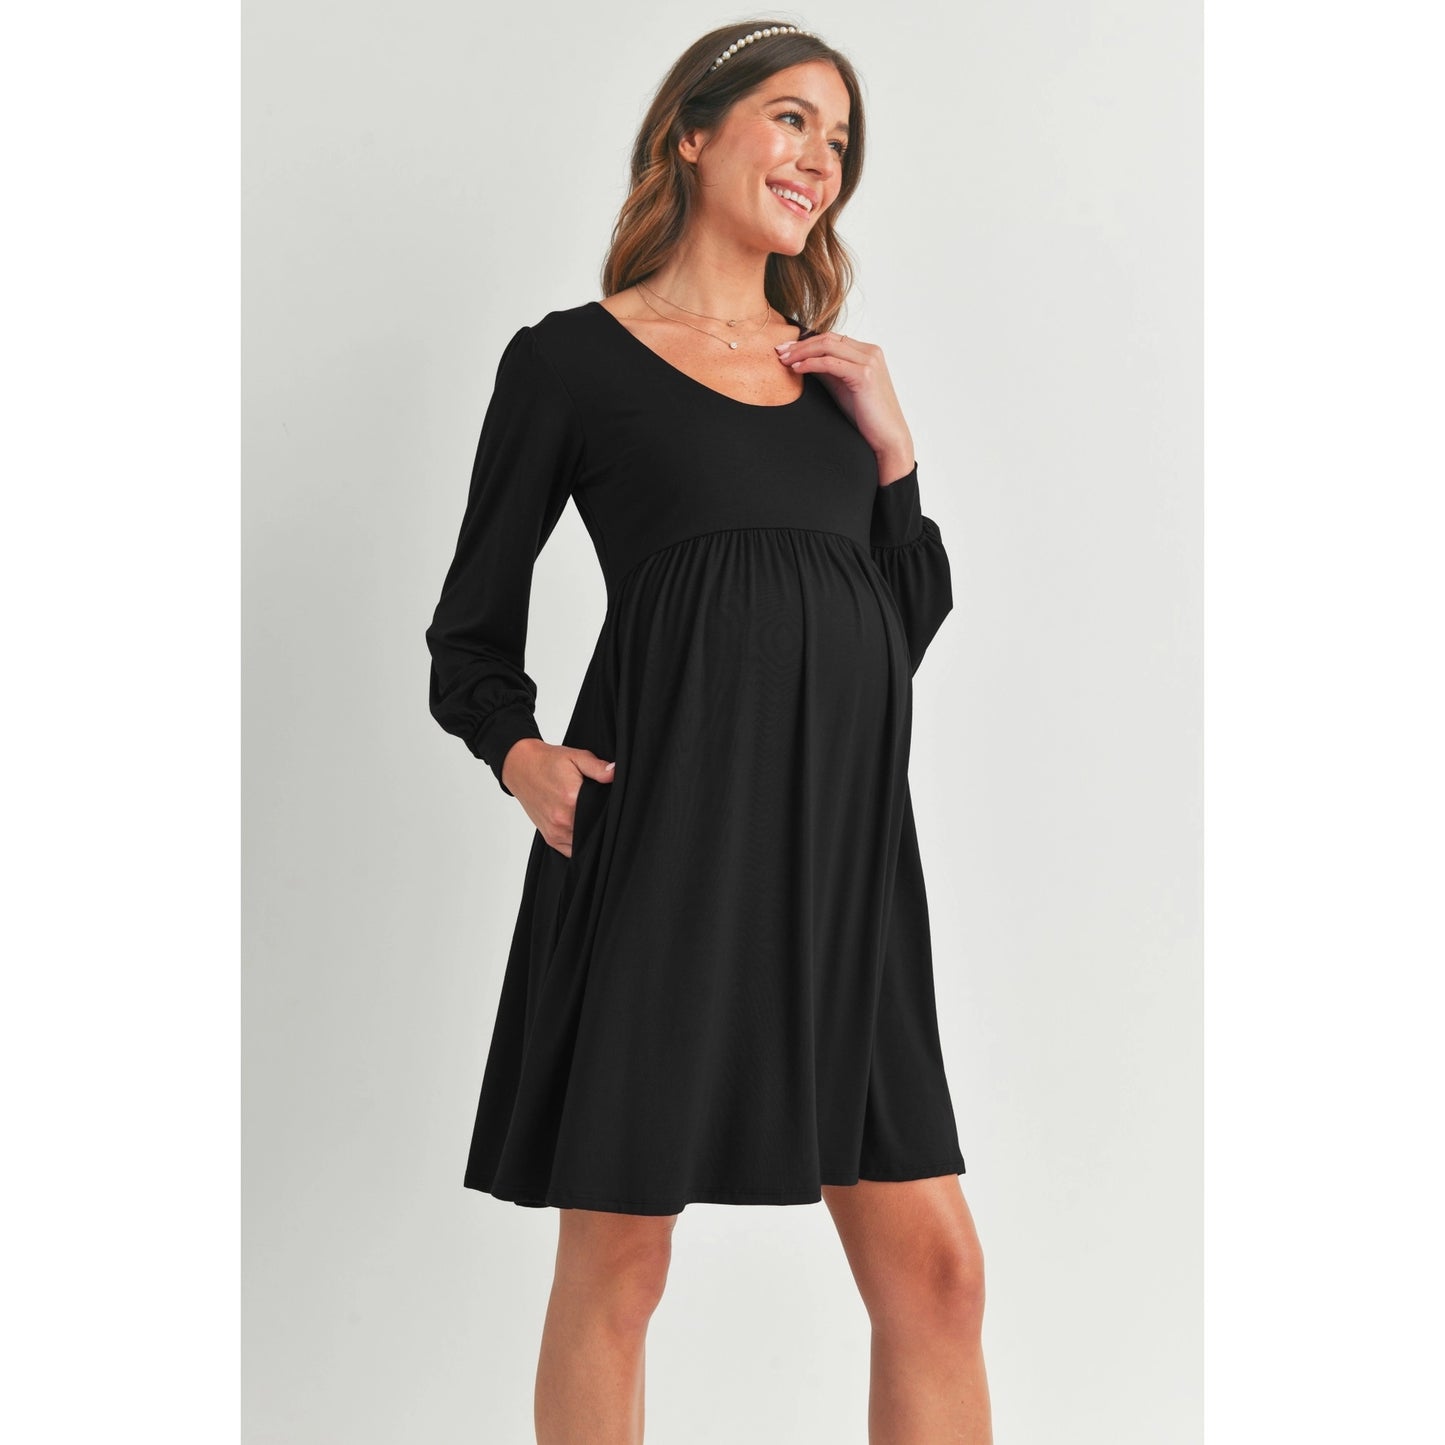 Wendy Black Maternity Dress (with pockets)